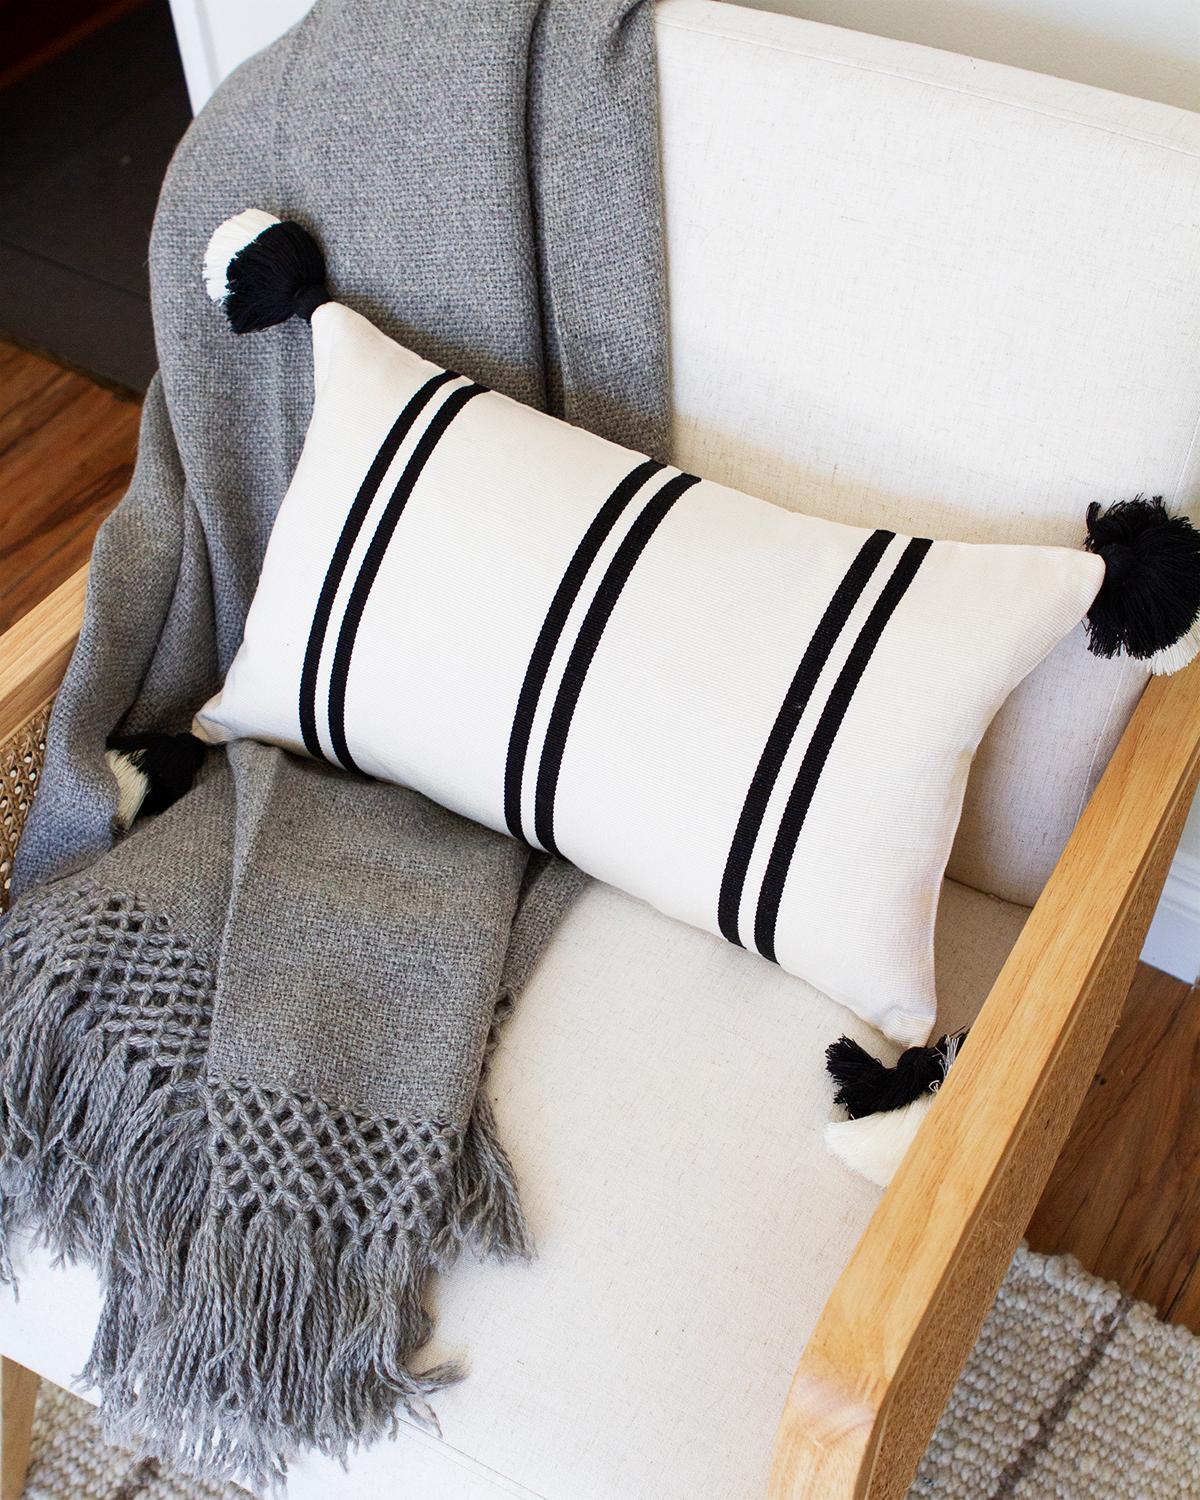 Artisanal Home Pillows made from 100% Pima Cotton

This black and white lumbar home decor pillow was hand woven on back strap looms in Peru out of 100% Pima cotton. Finding the right throw pillow for the couch in your living room or the bed in your